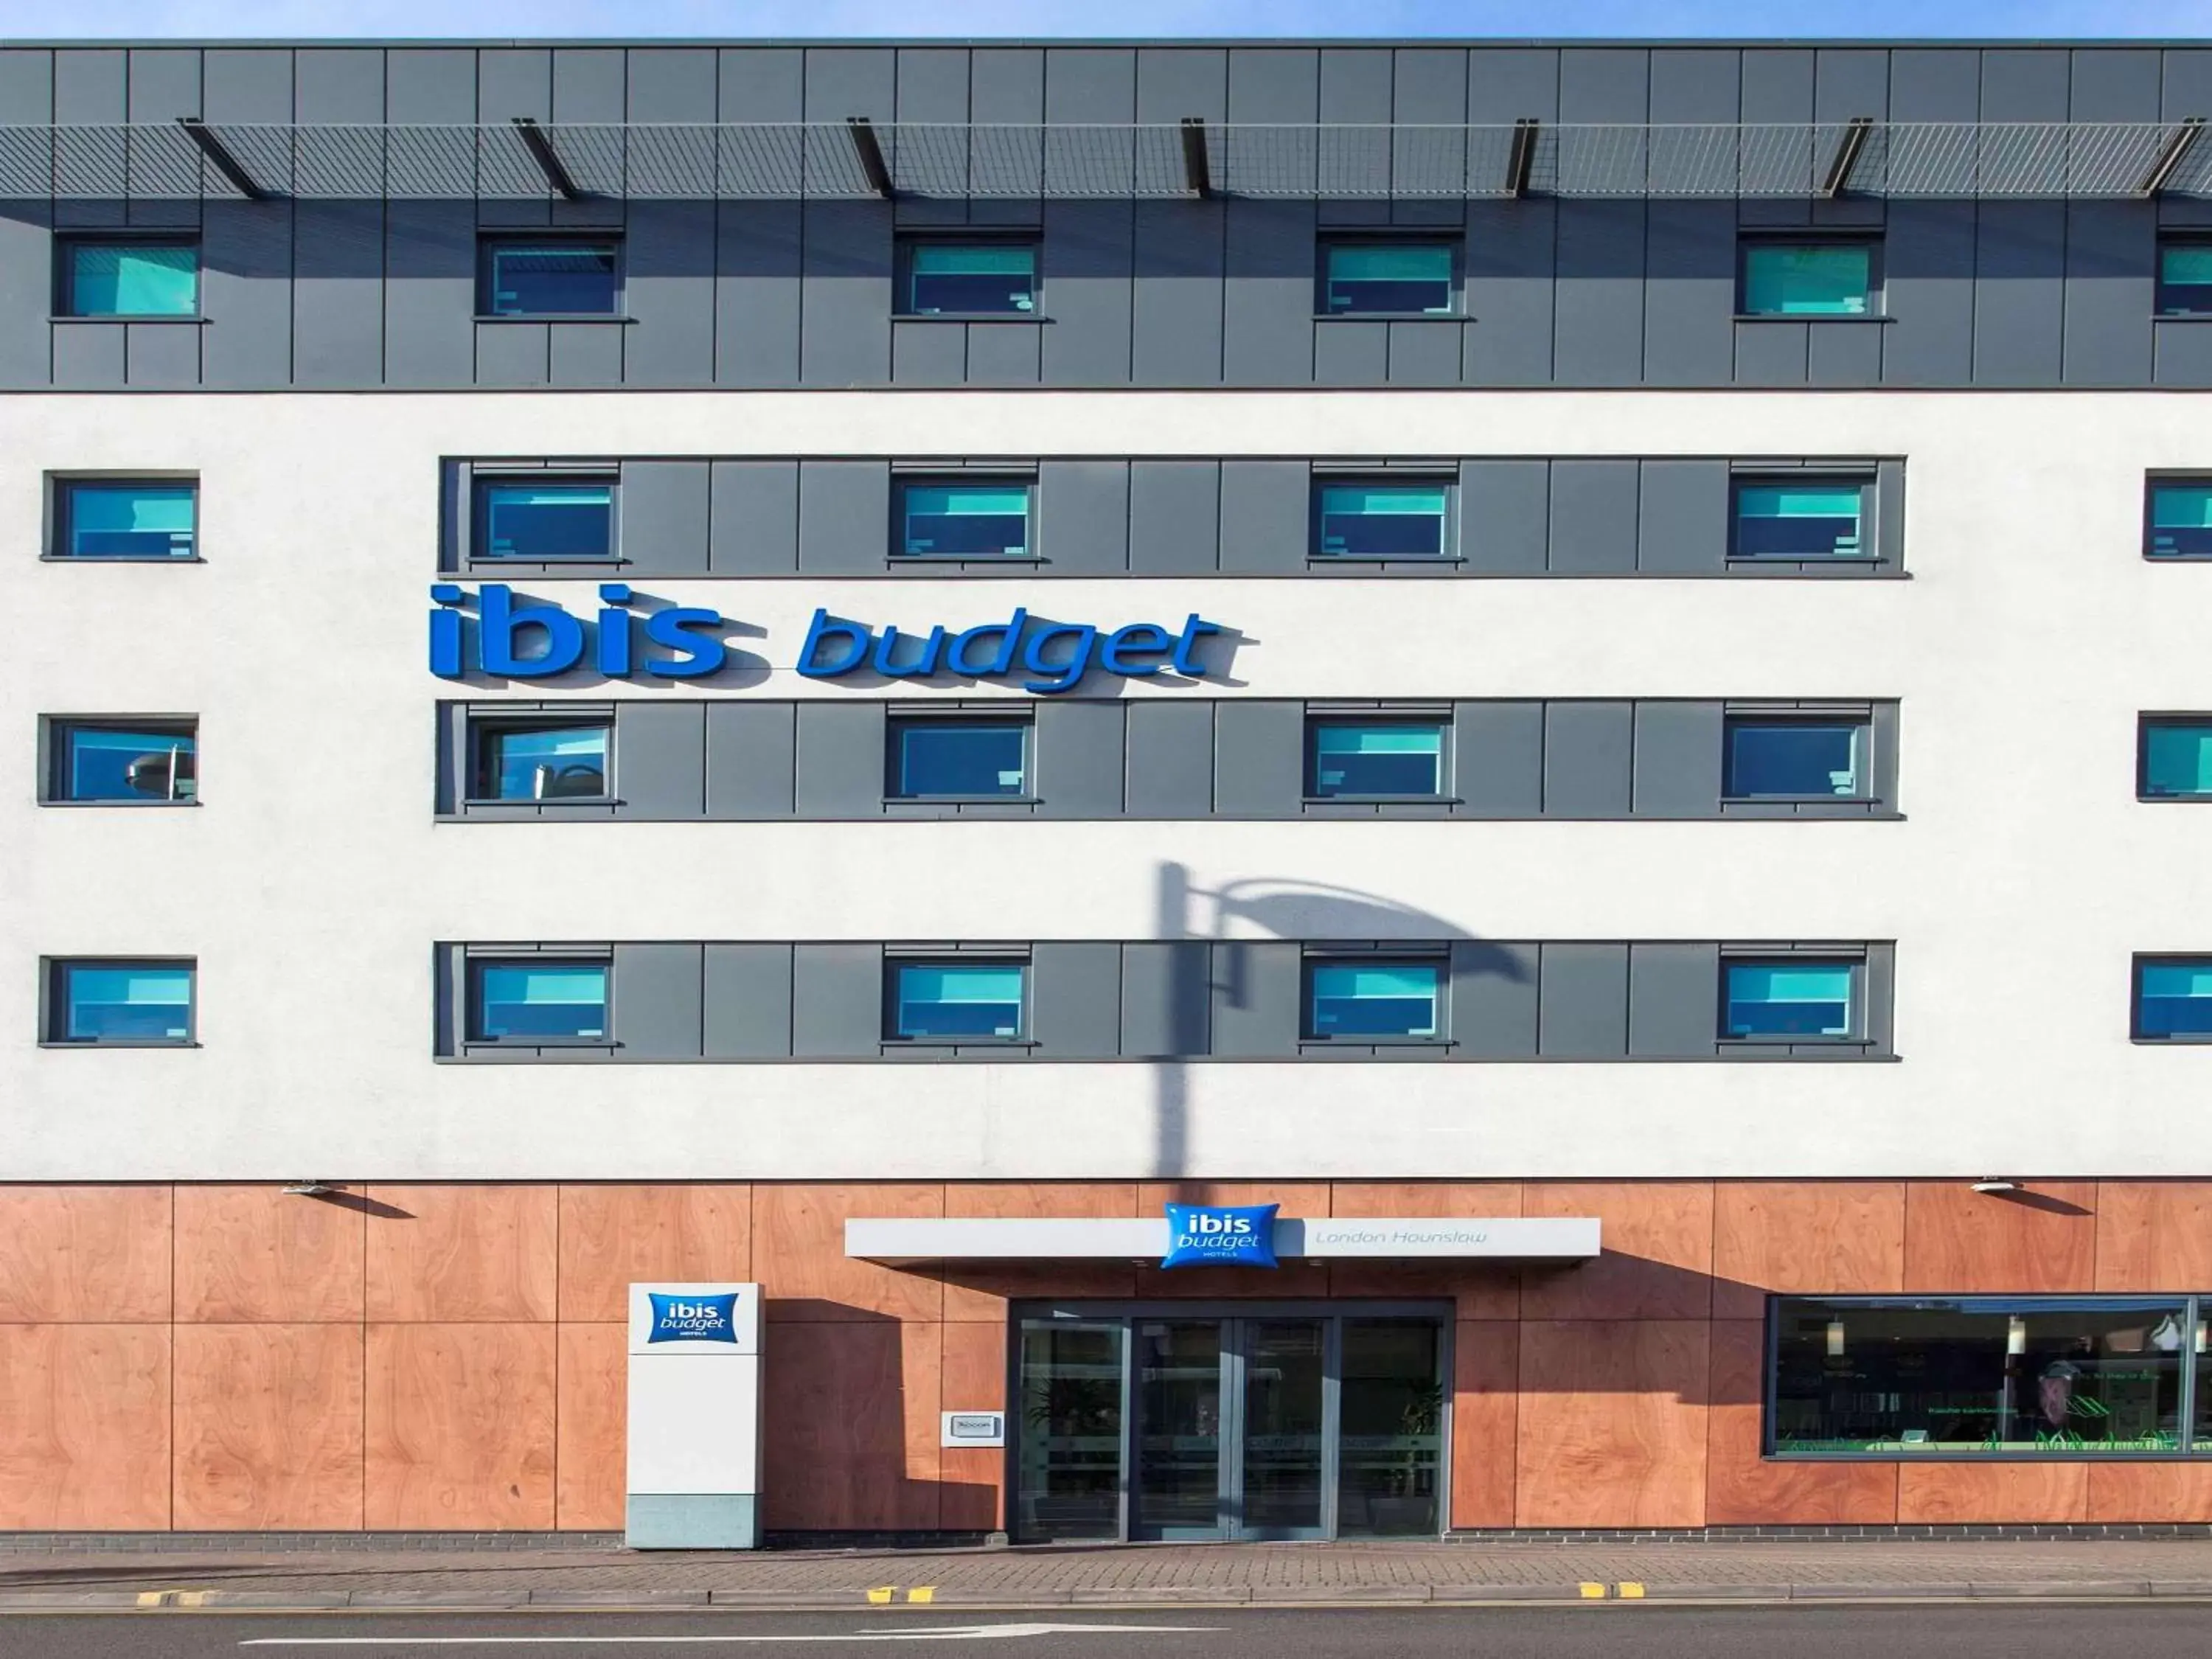 Property building in ibis budget London Hounslow